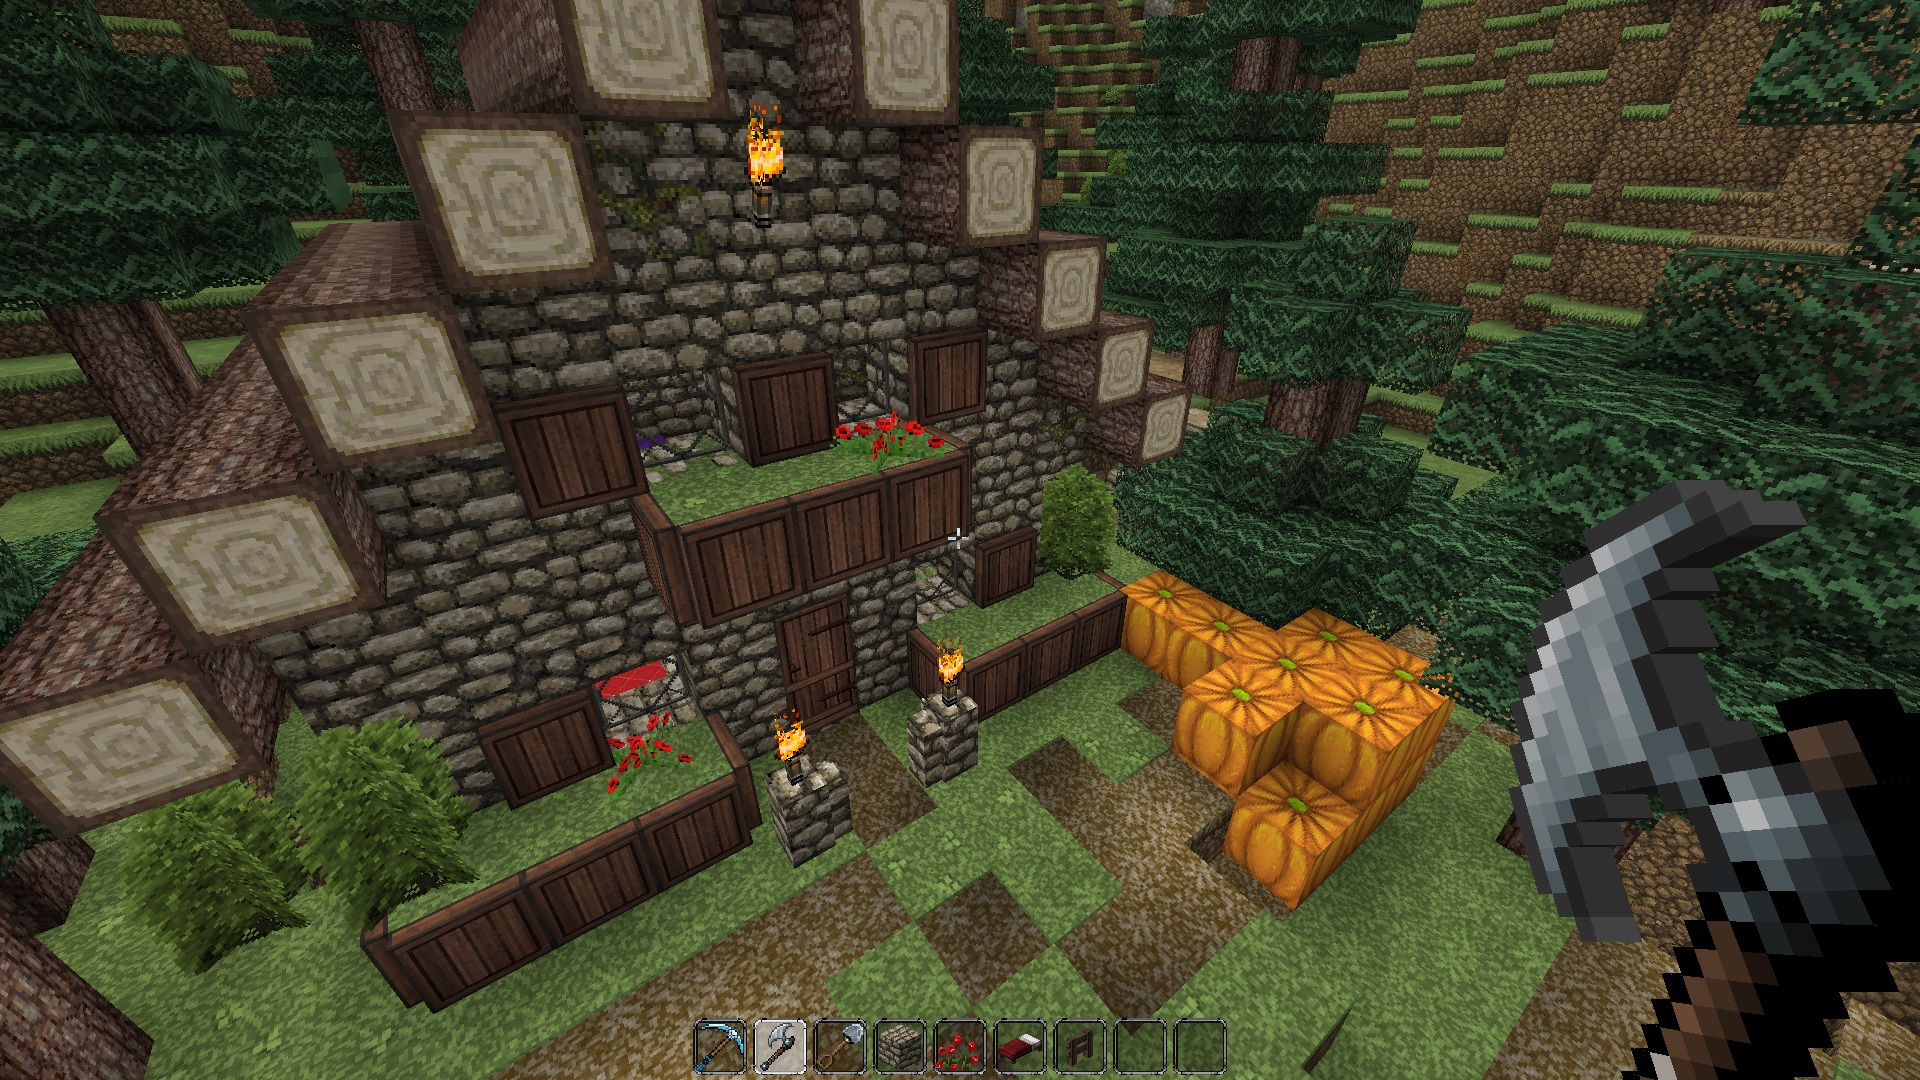 Minecraft texture pack - John Smith Legacy - A player holds a medieval looking axe while looking at a village house with detailed wood and cobbled stones